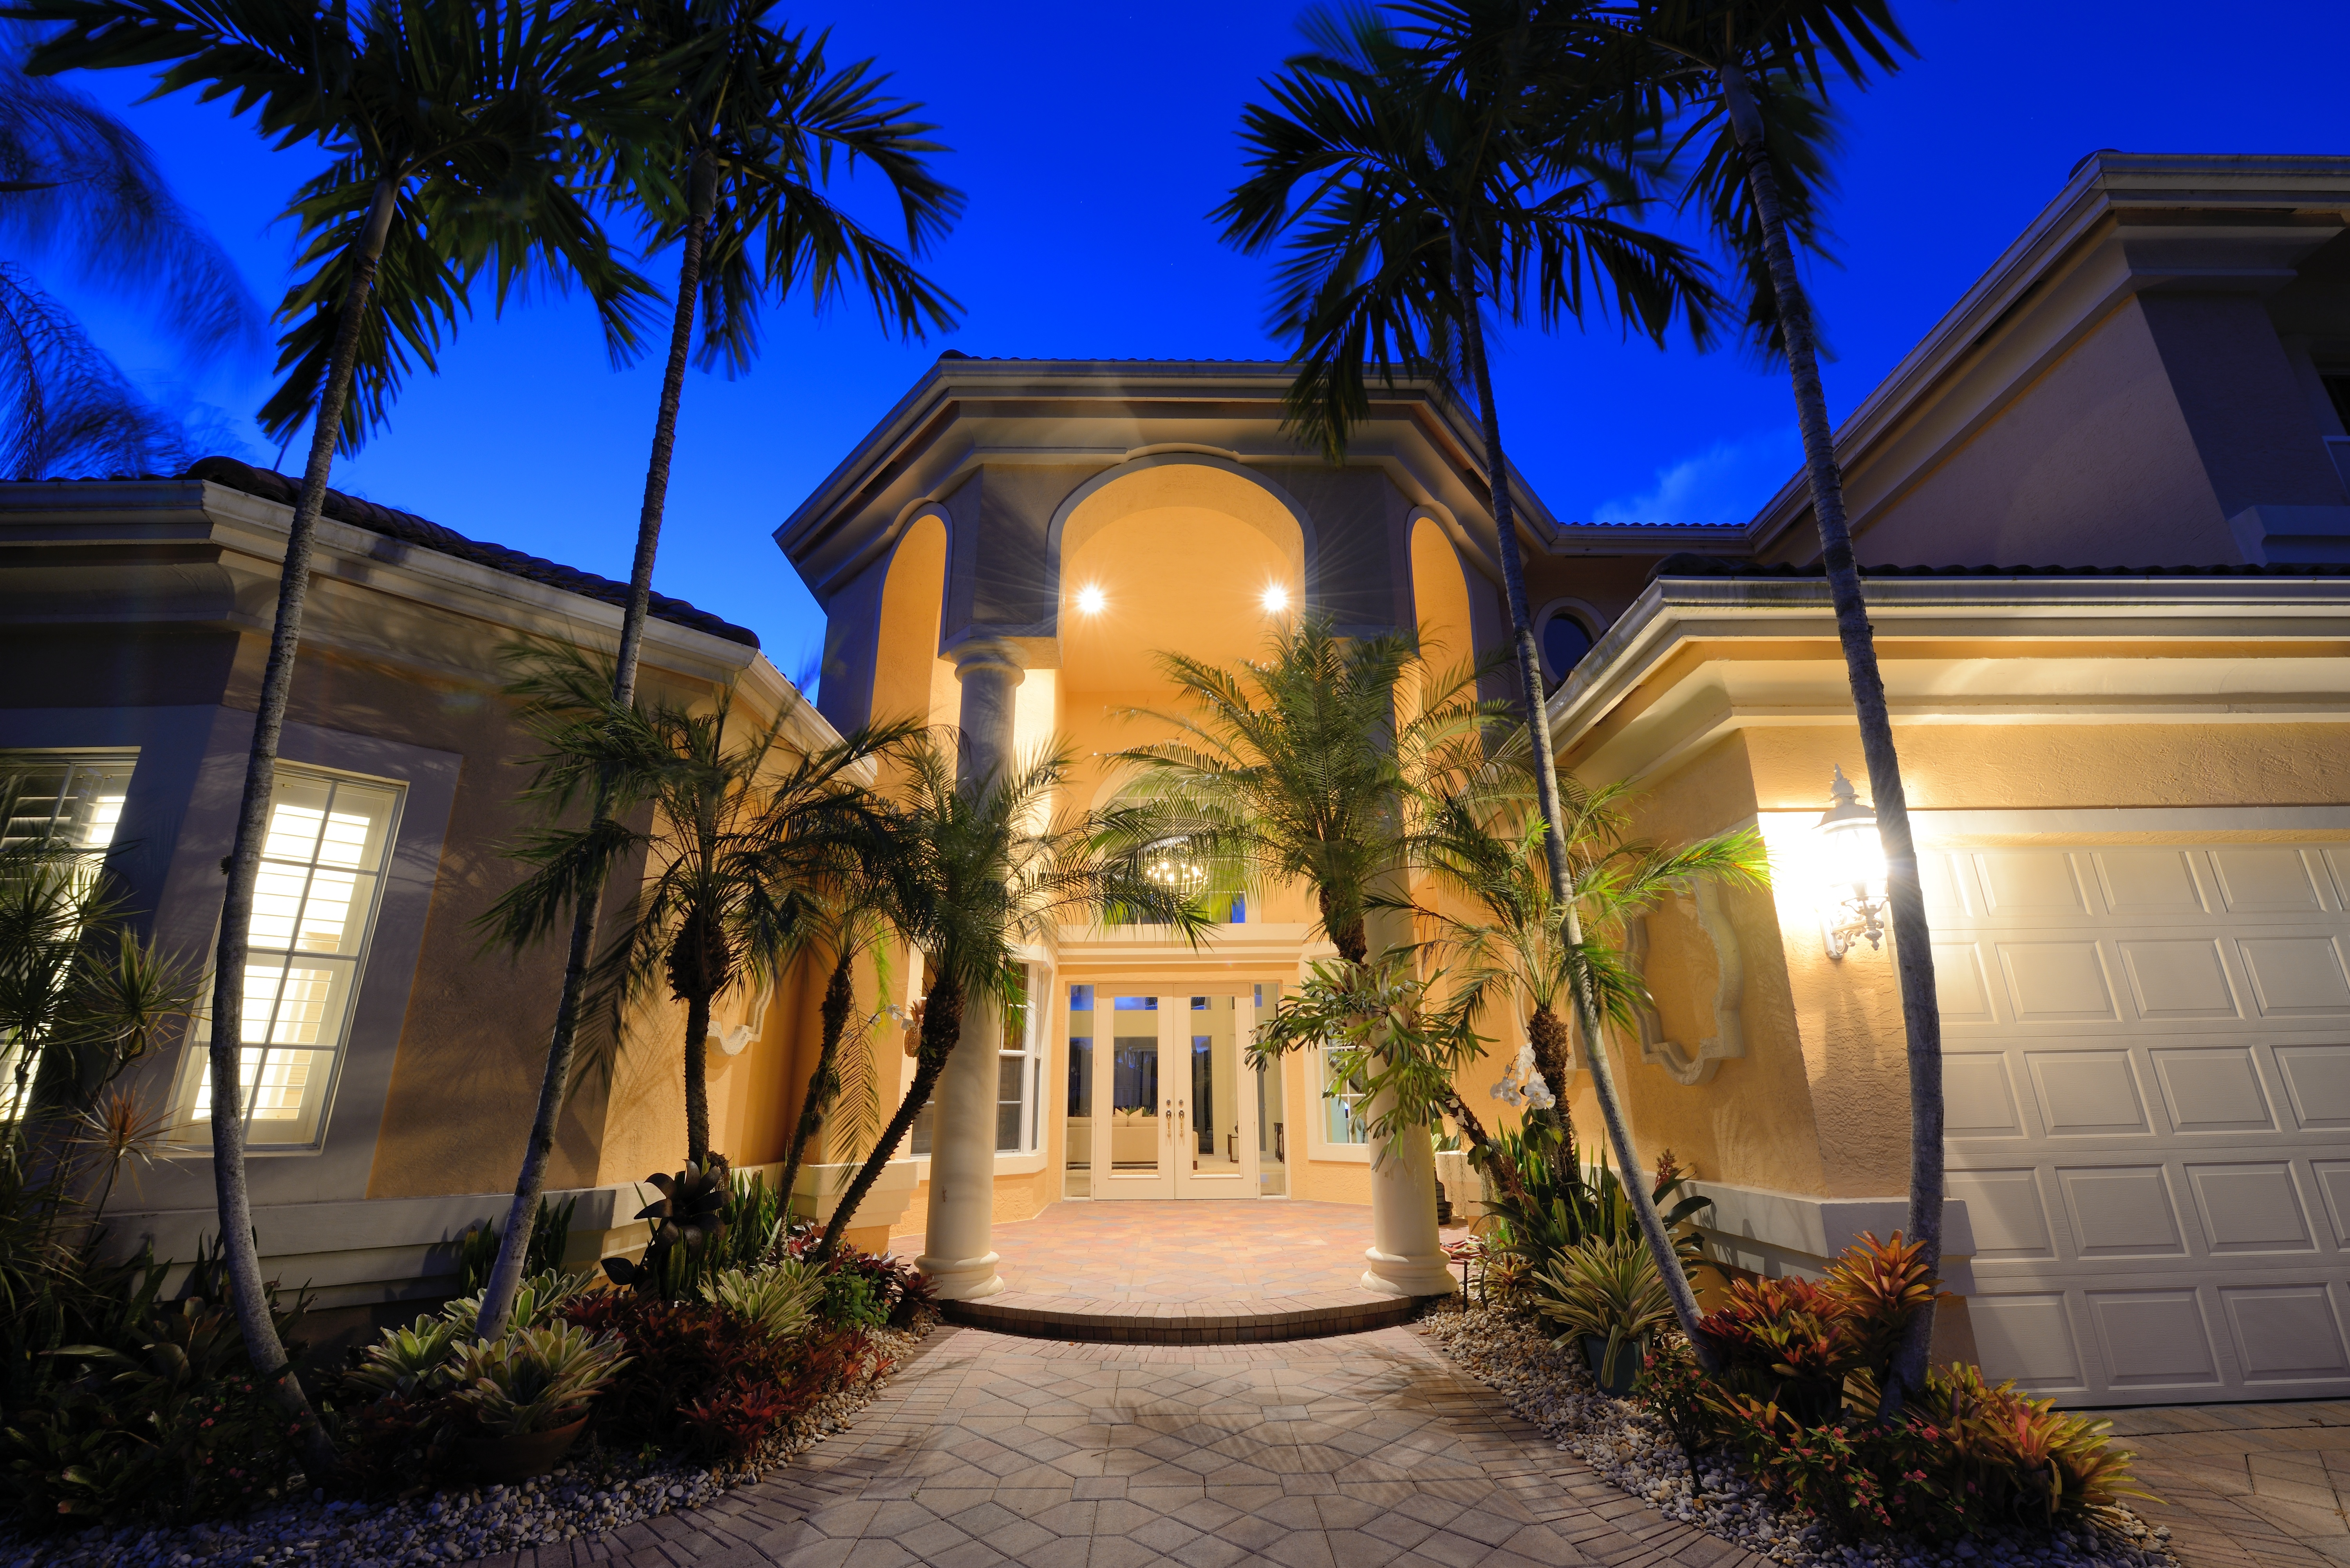 Mansion entrance in a tropical location.